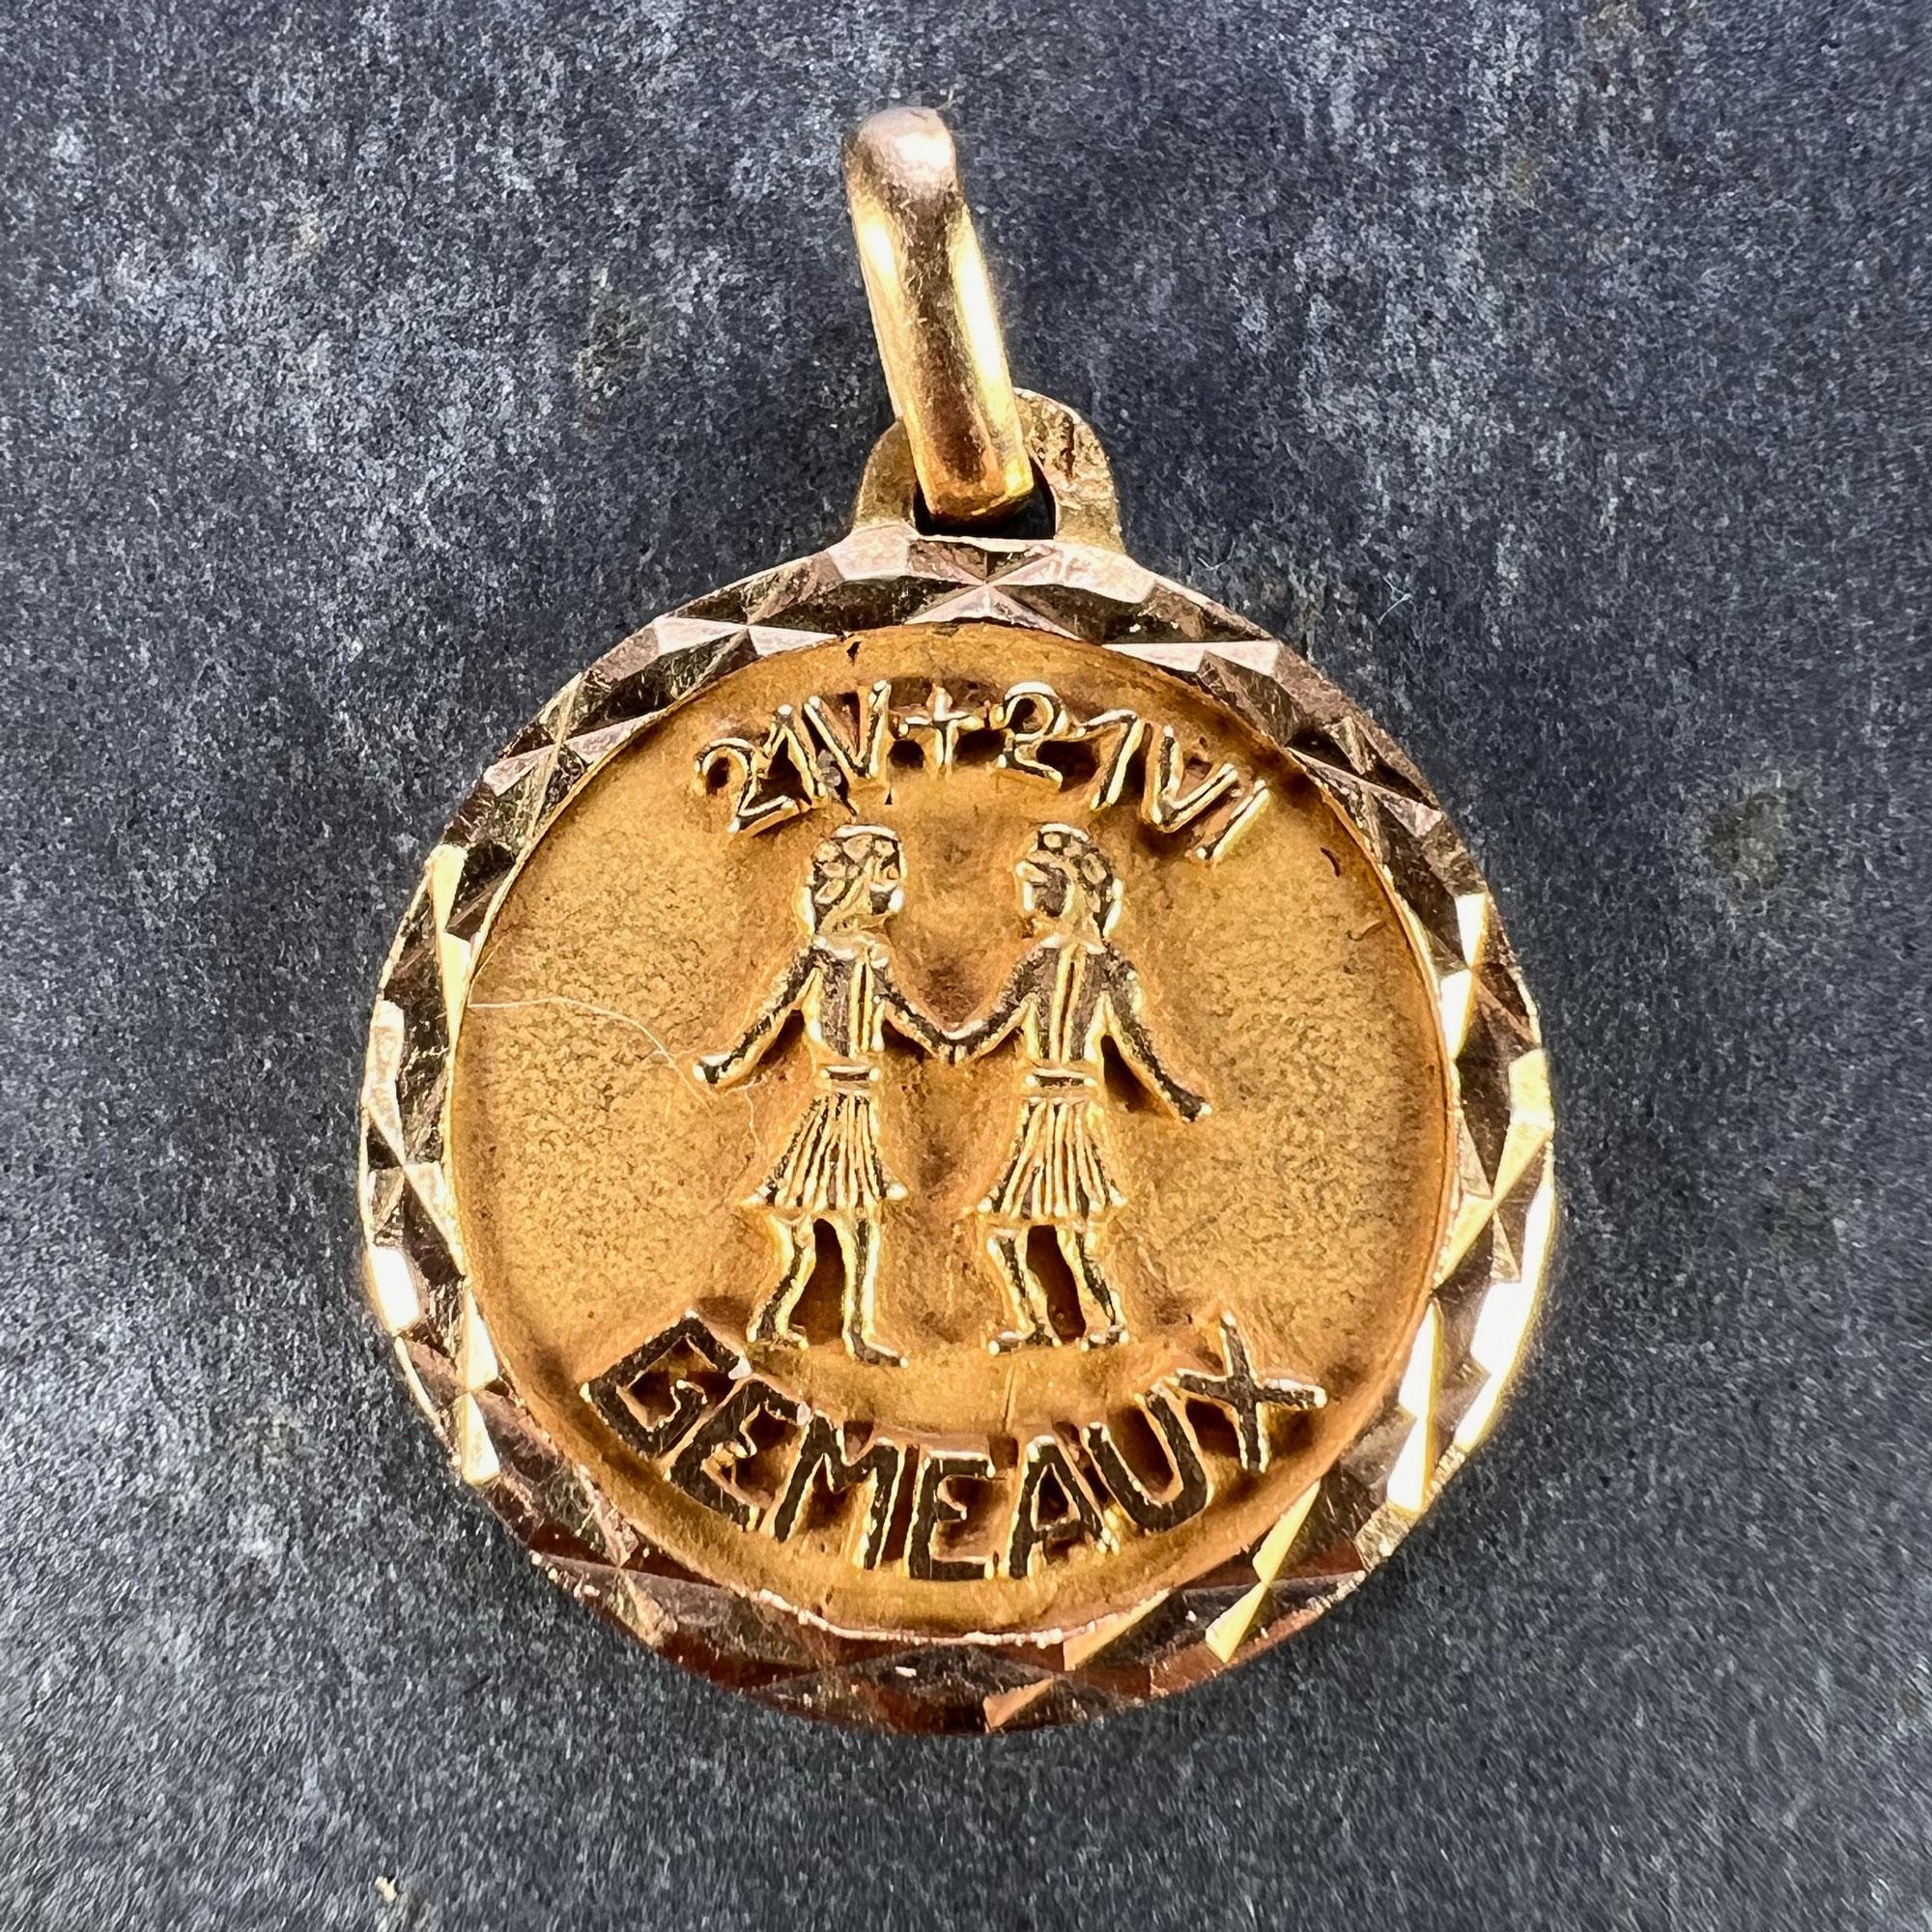 A French 18 karat (18K) yellow gold charm pendant designed as a medal depicting the Zodiac sign of Gemini within a faceted frame, showing a pair of twins holding hands with the dates 21 V + 21 VI above, and the word 'Gemeaux' below. Stamped with the